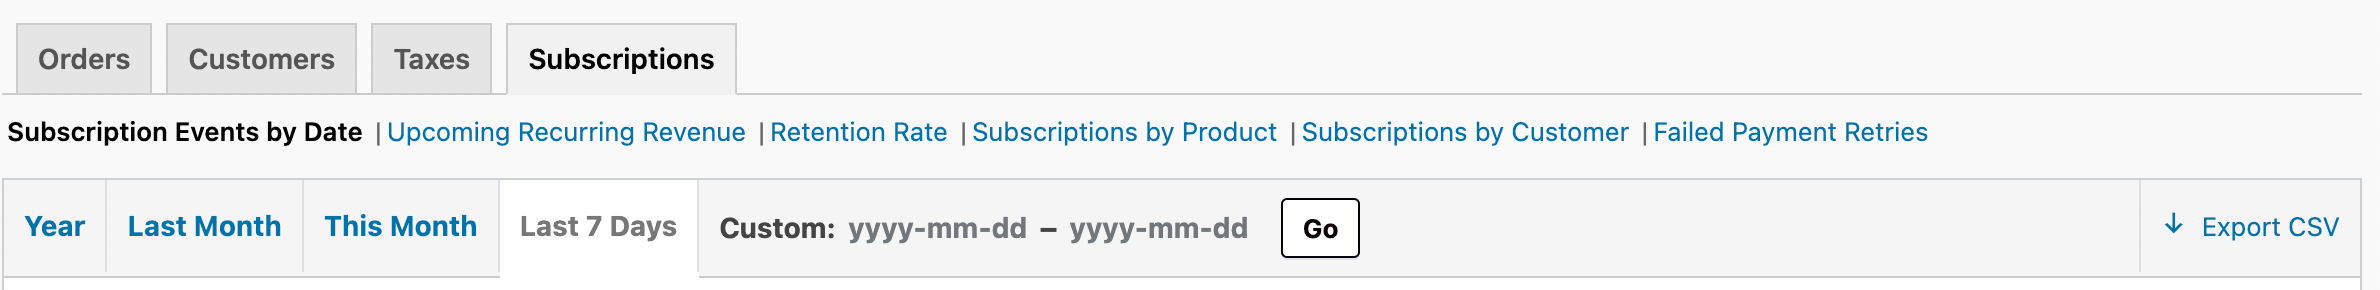 Support Docs - Subscription Reports - Step 1